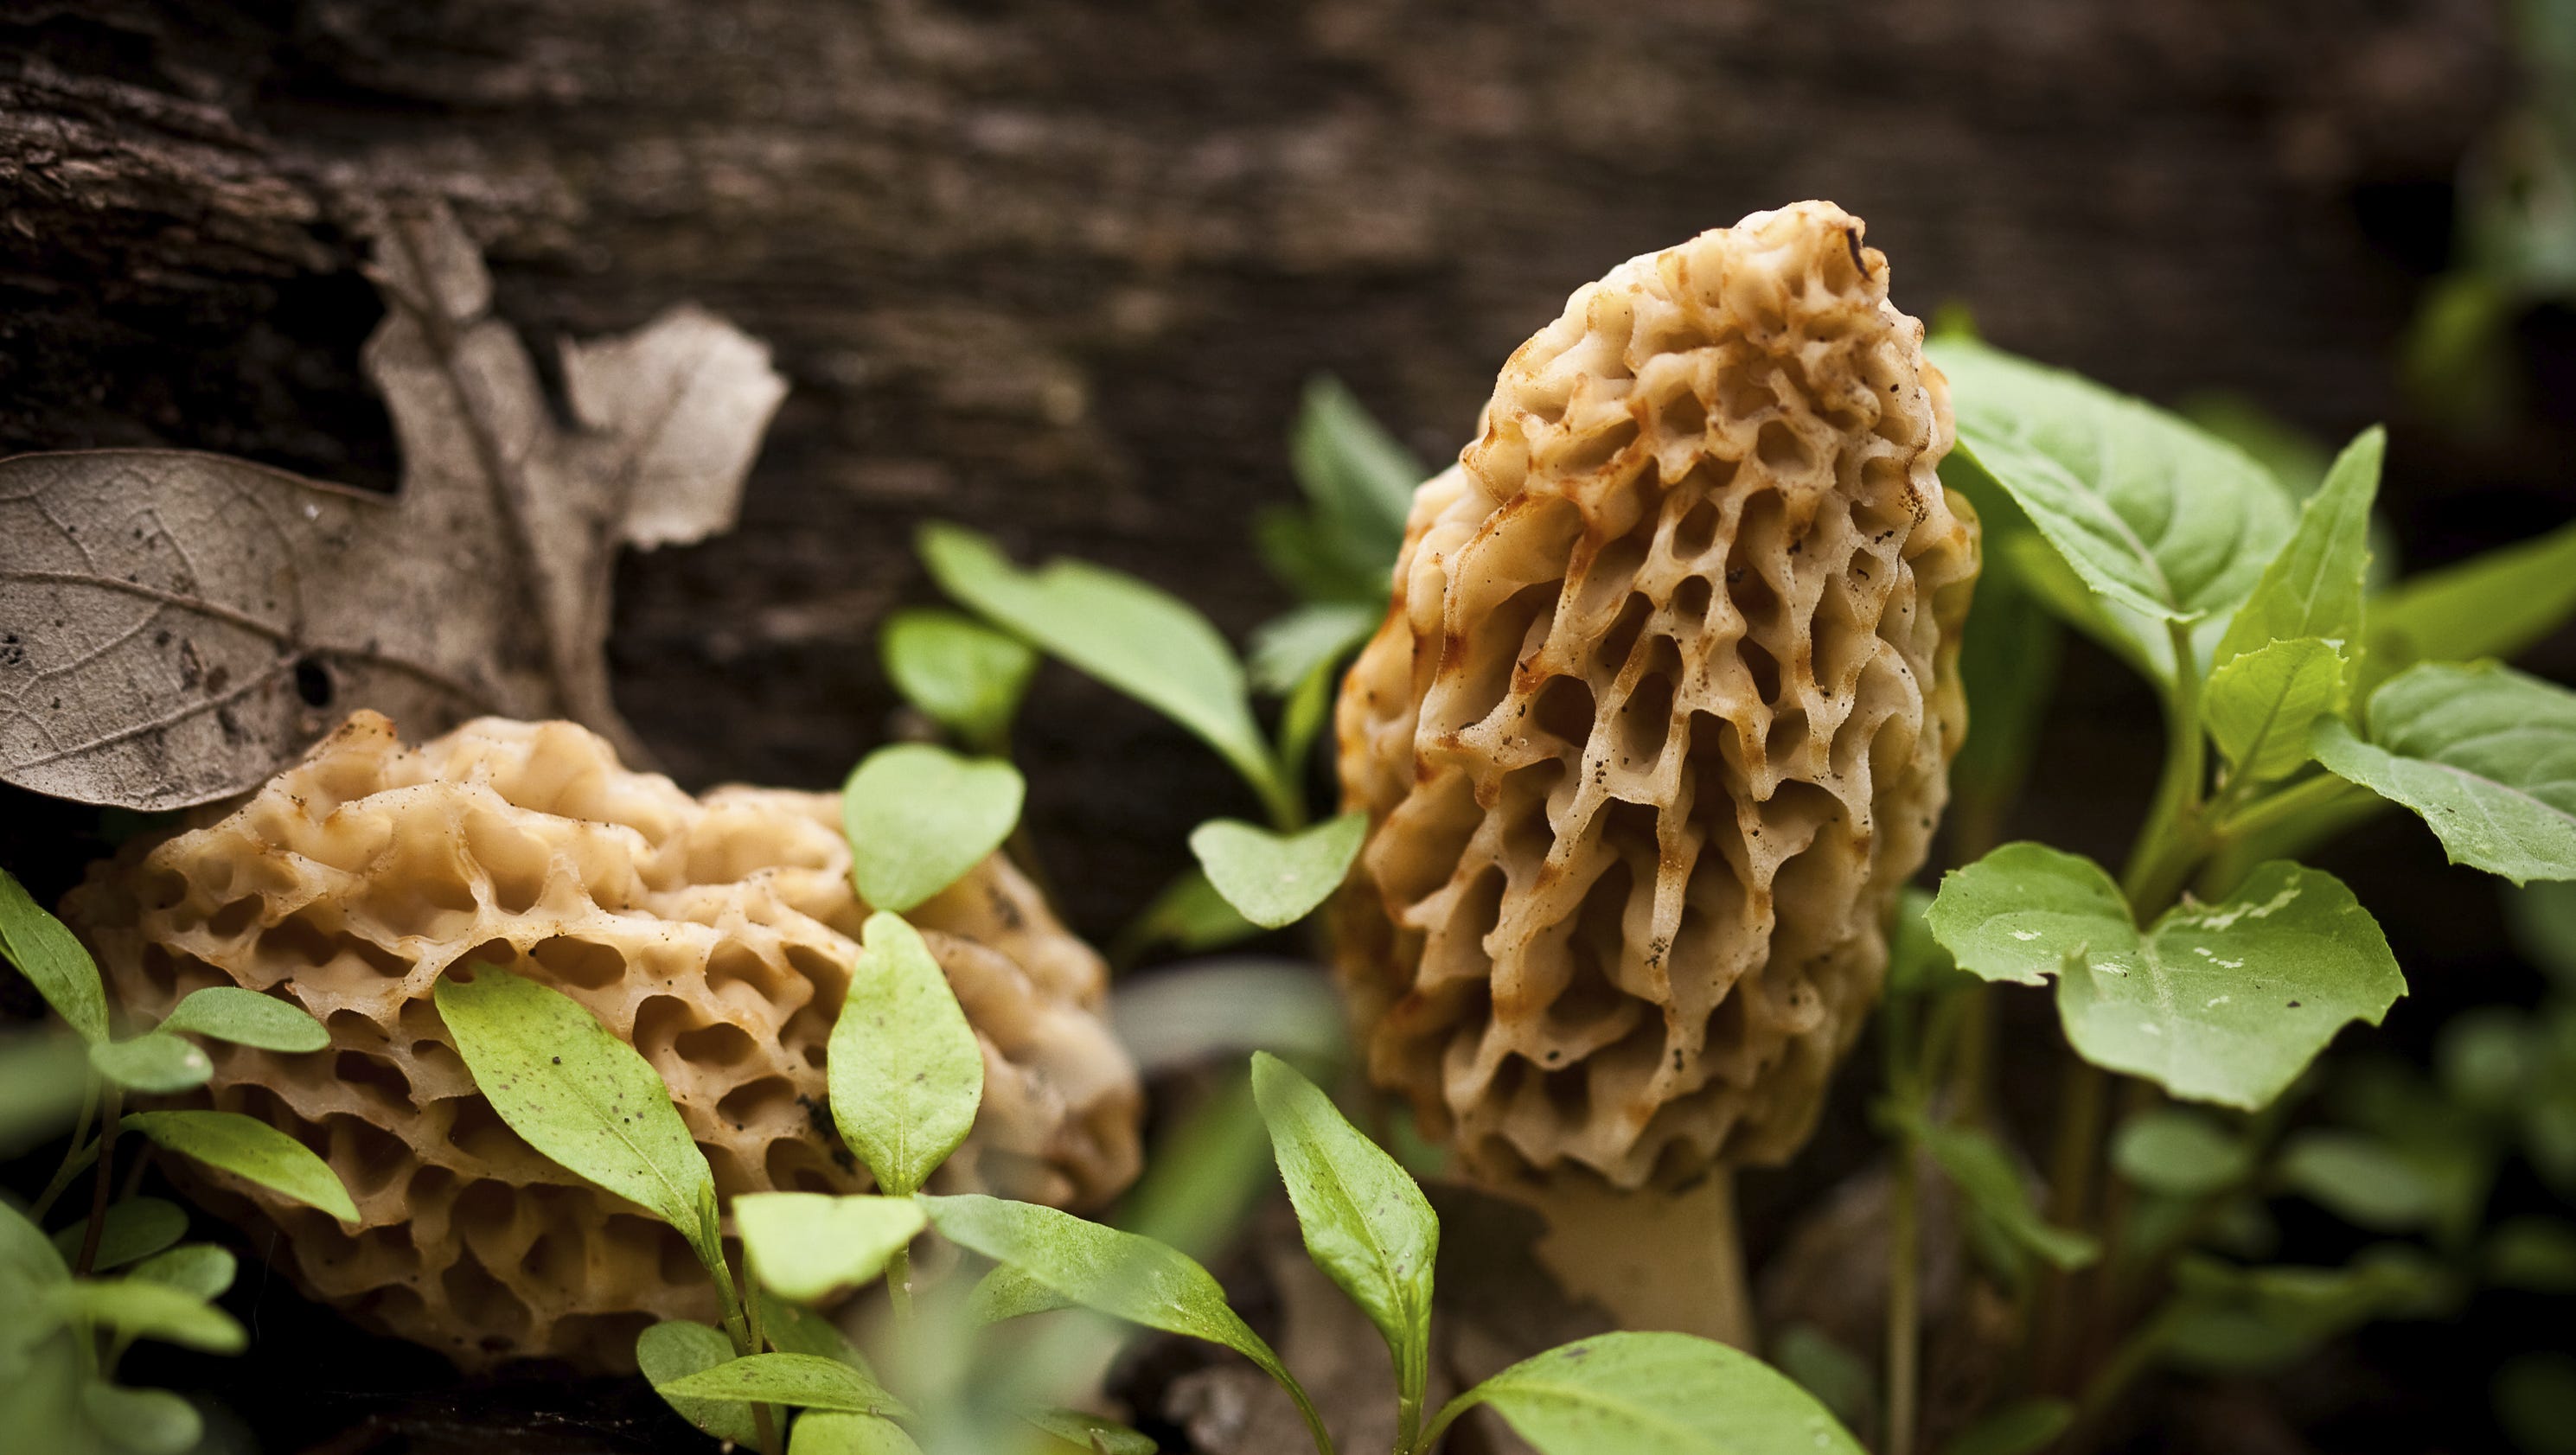 It's morel mushroom season in Indiana. Here's what you need to know